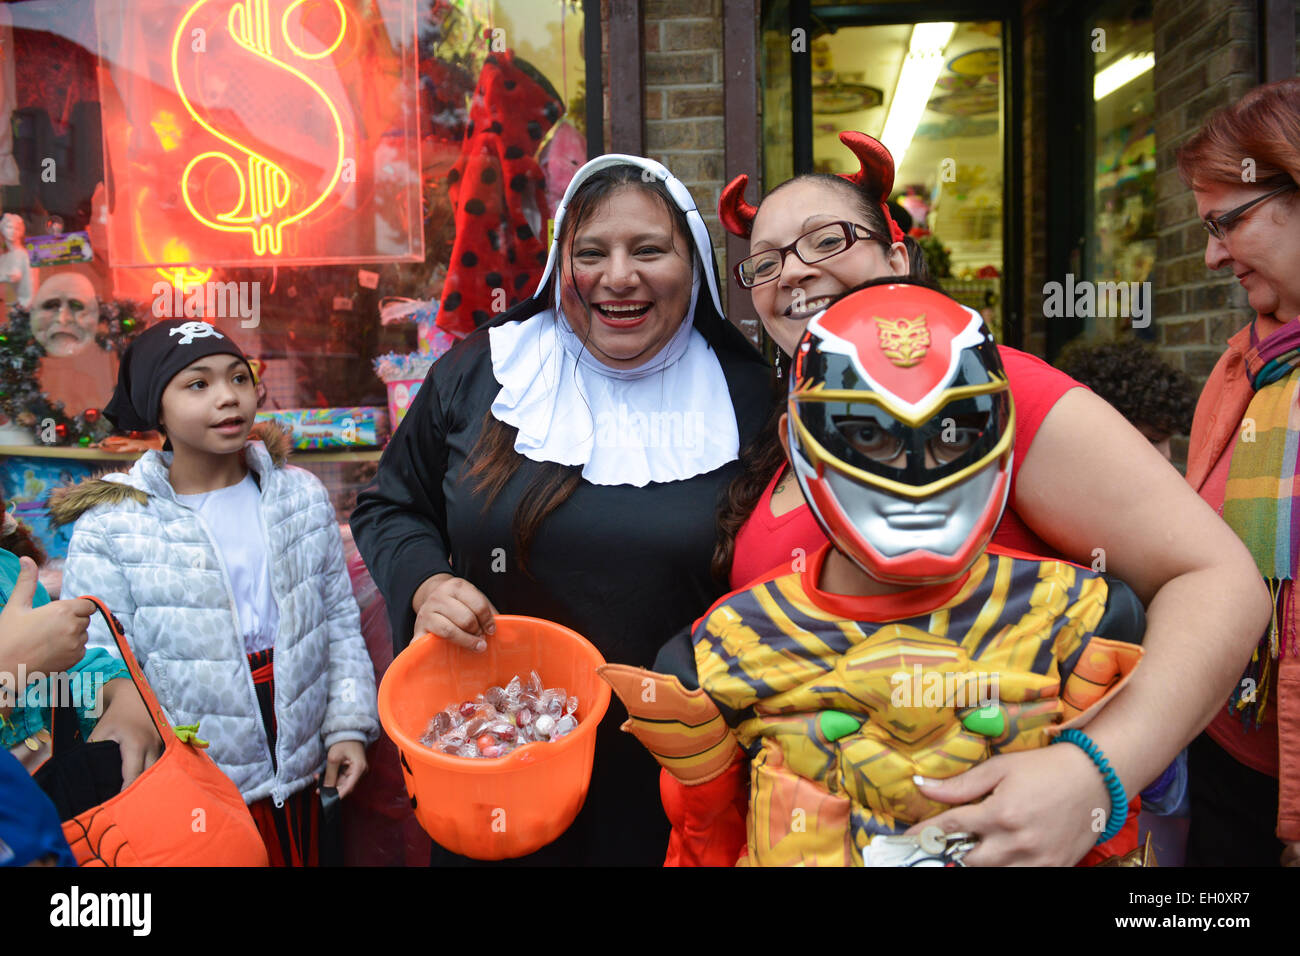 Woman dressed as a nun holding a bucket full of candy with people around her posing. Halloween 2013. Newark, New Jersey. Stock Photo